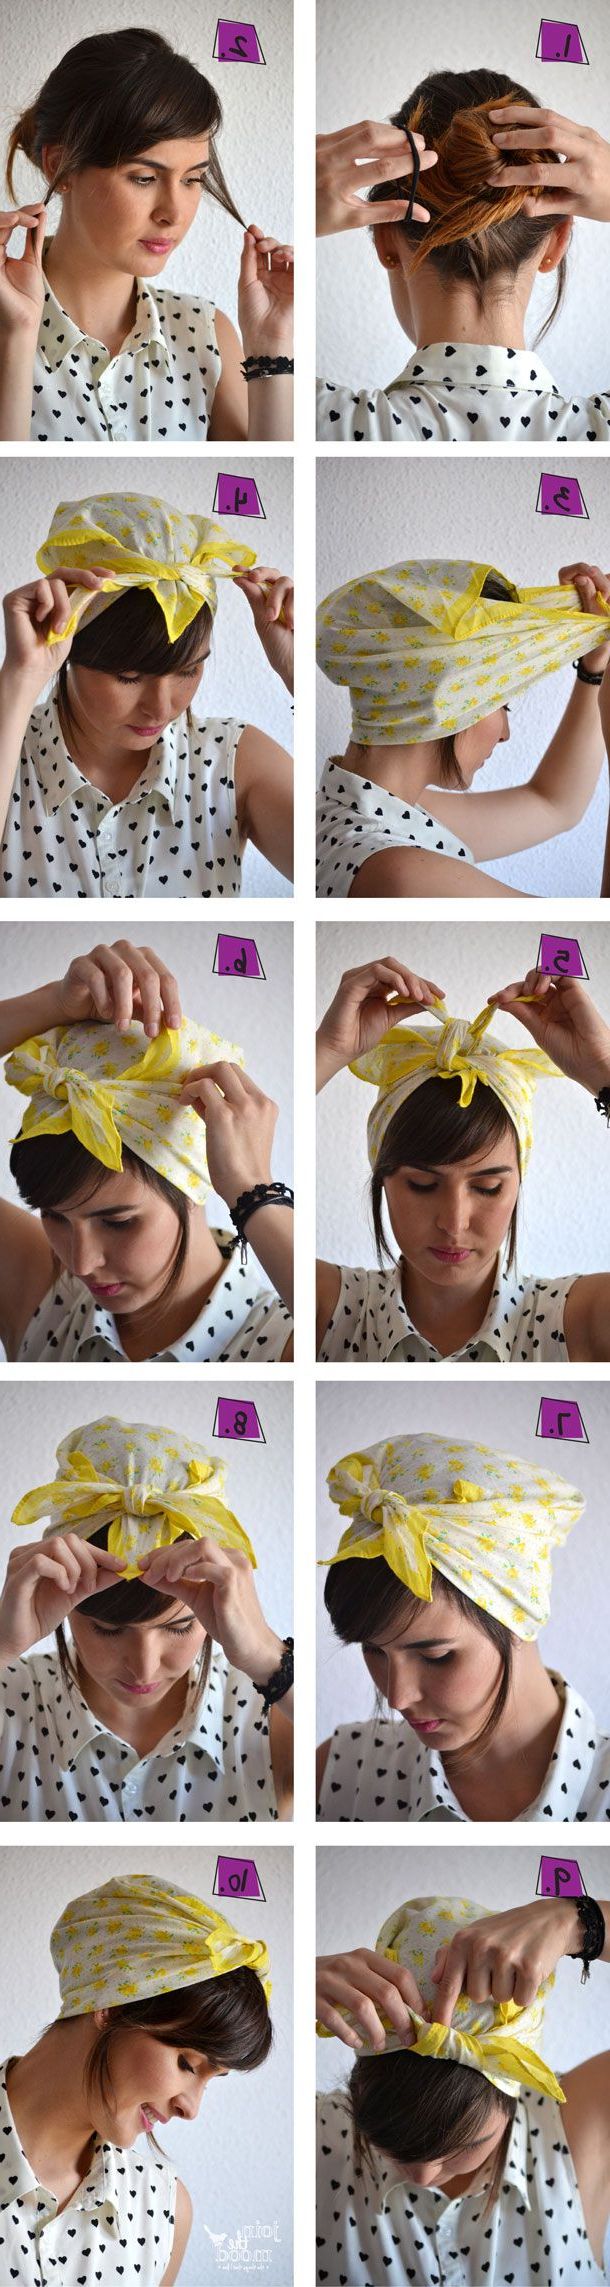 14 Tutorials For Bandana Hairstyles – Pretty Designs Intended For Short Hairstyles With Bandanas (View 17 of 25)